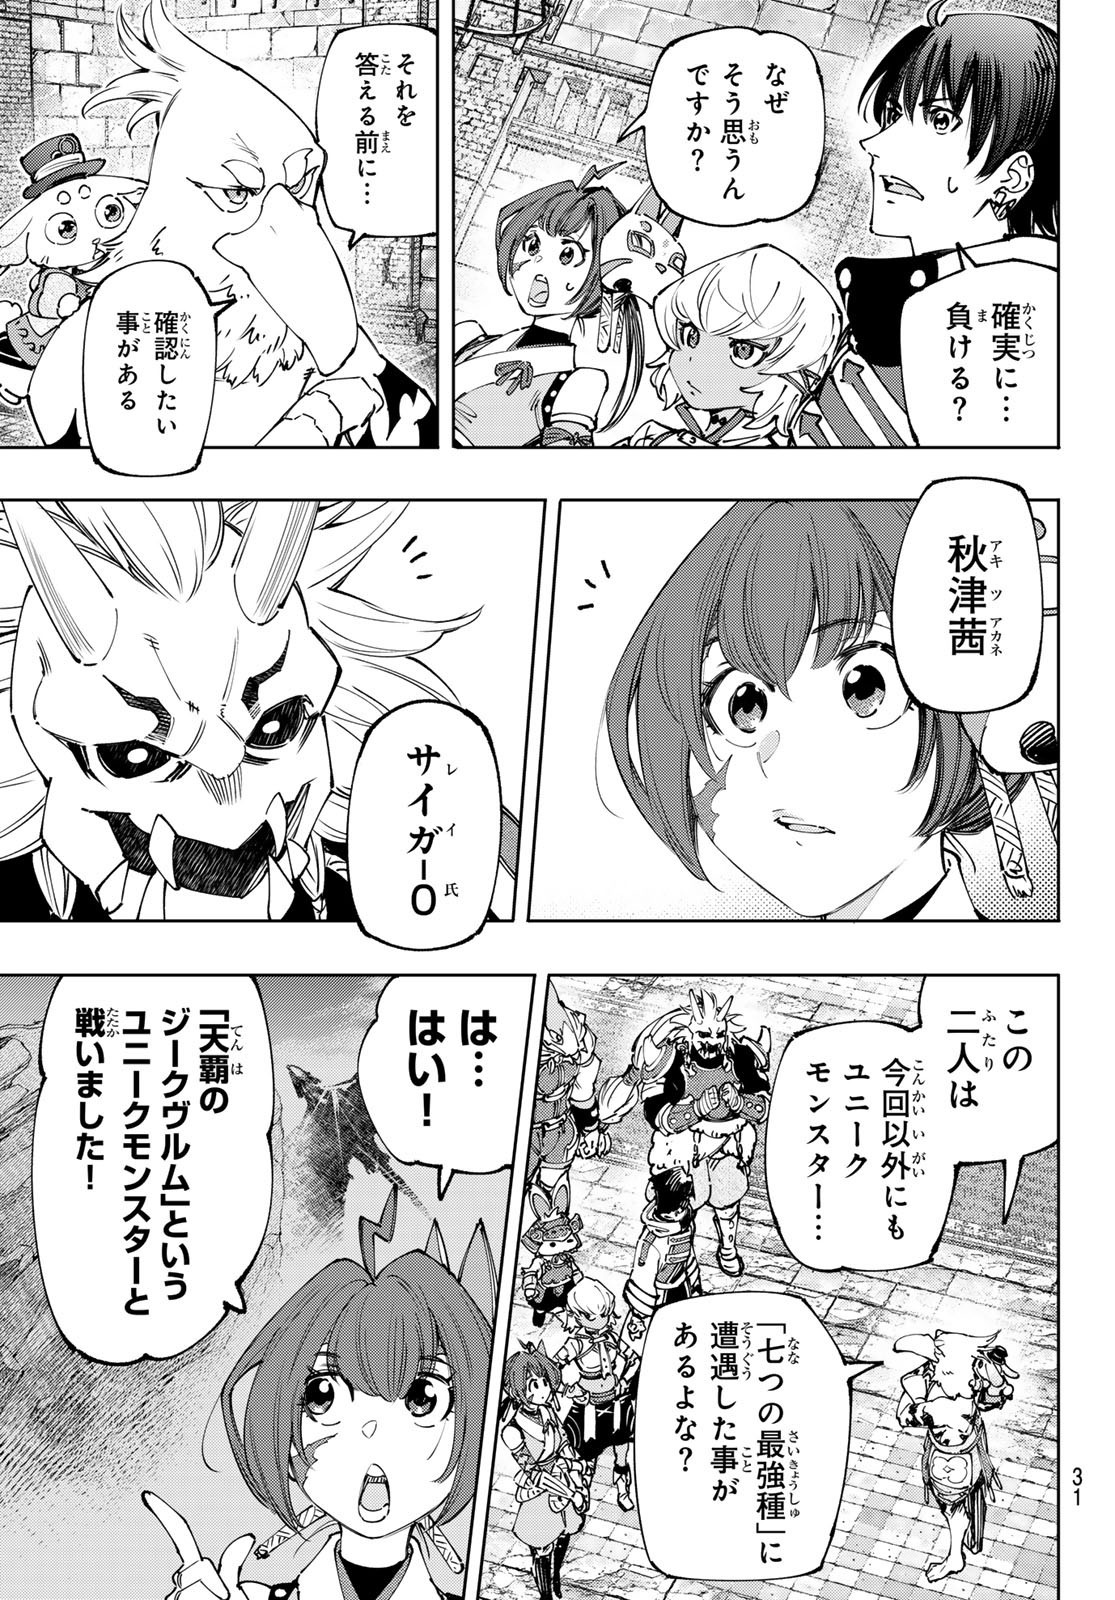 Weekly Shōnen Magazine - 週刊少年マガジン - Chapter 2024-24 - Page 31